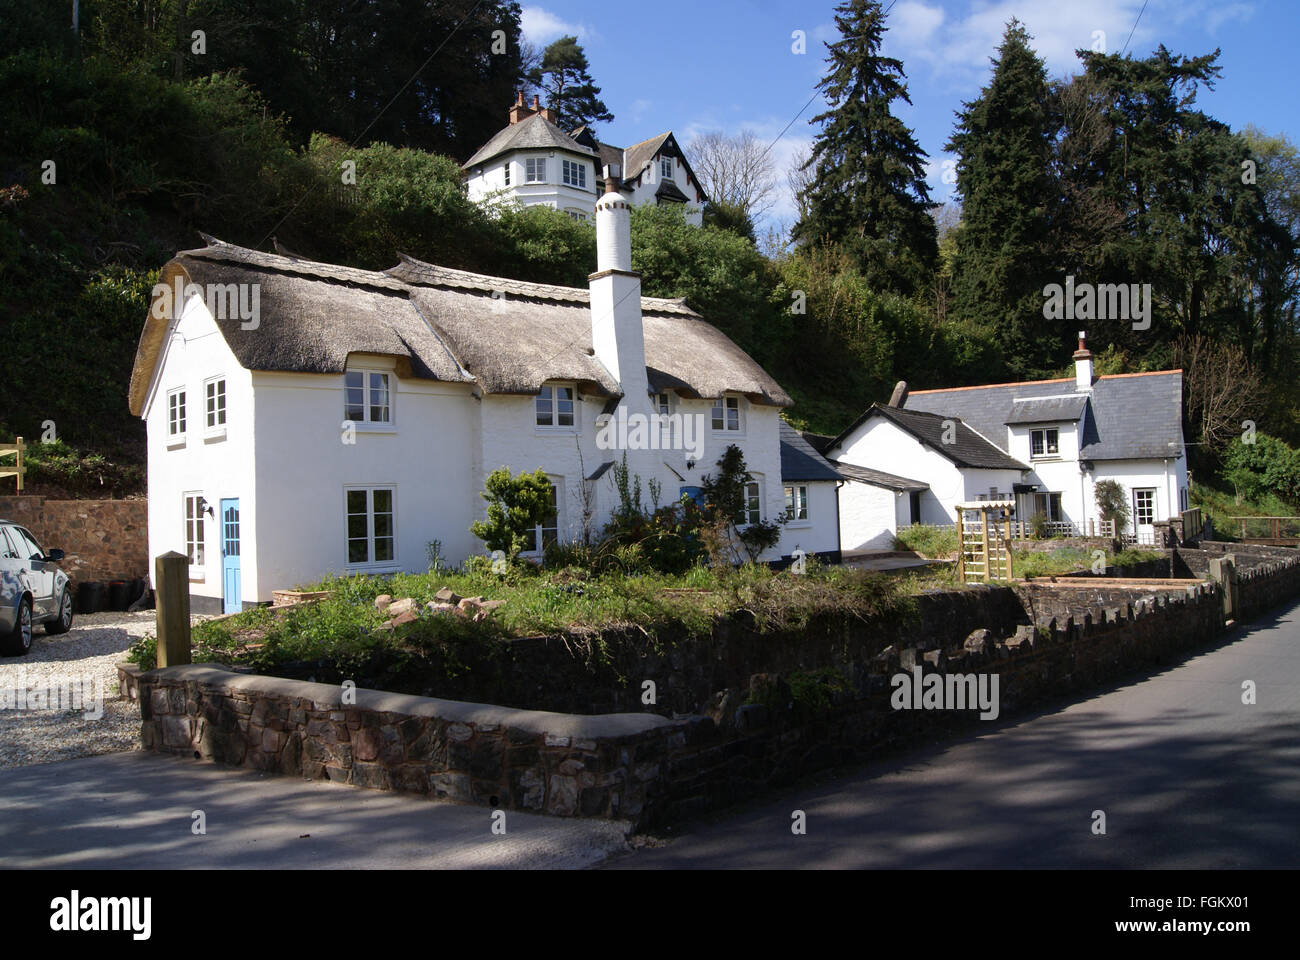 A large thatched house in a small English village Stock Photo